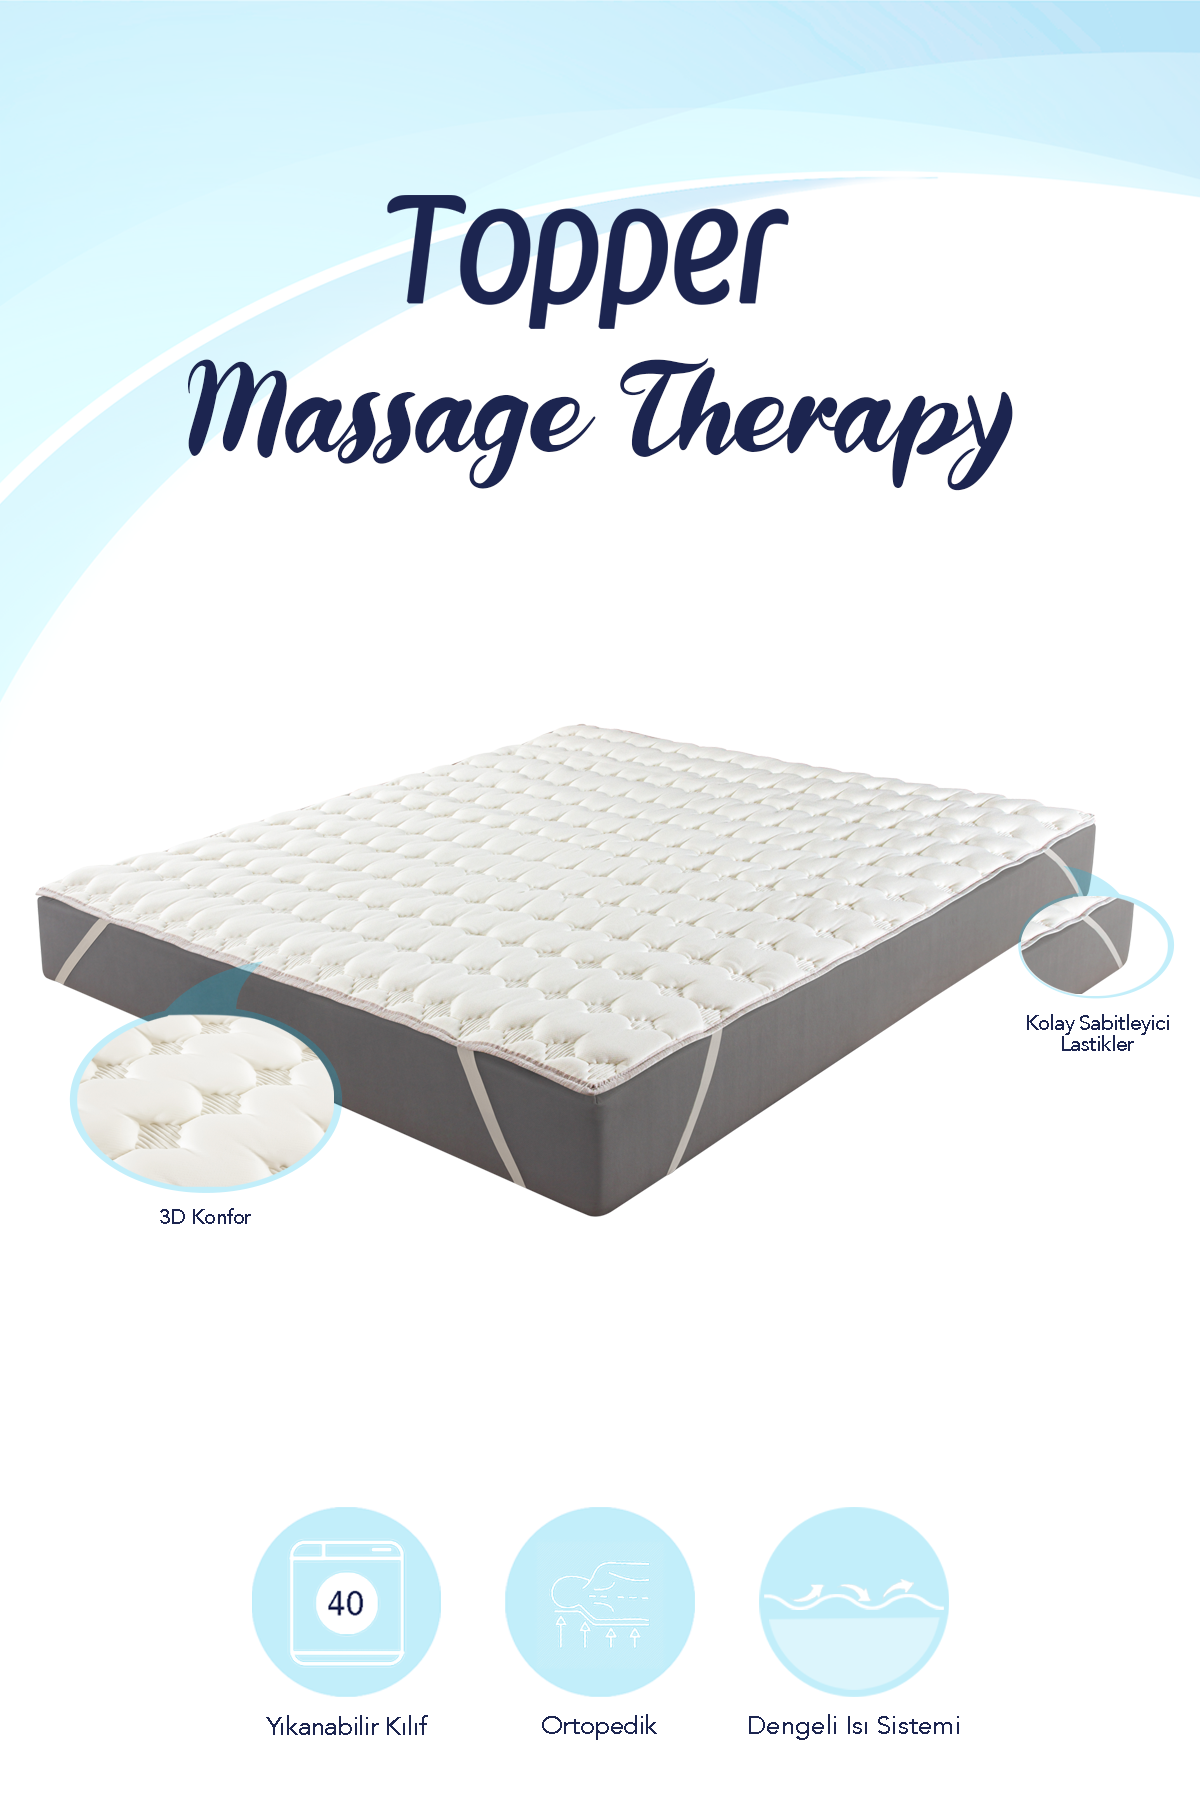 Deluxe massage bed topper For A Good Night's Sleep 